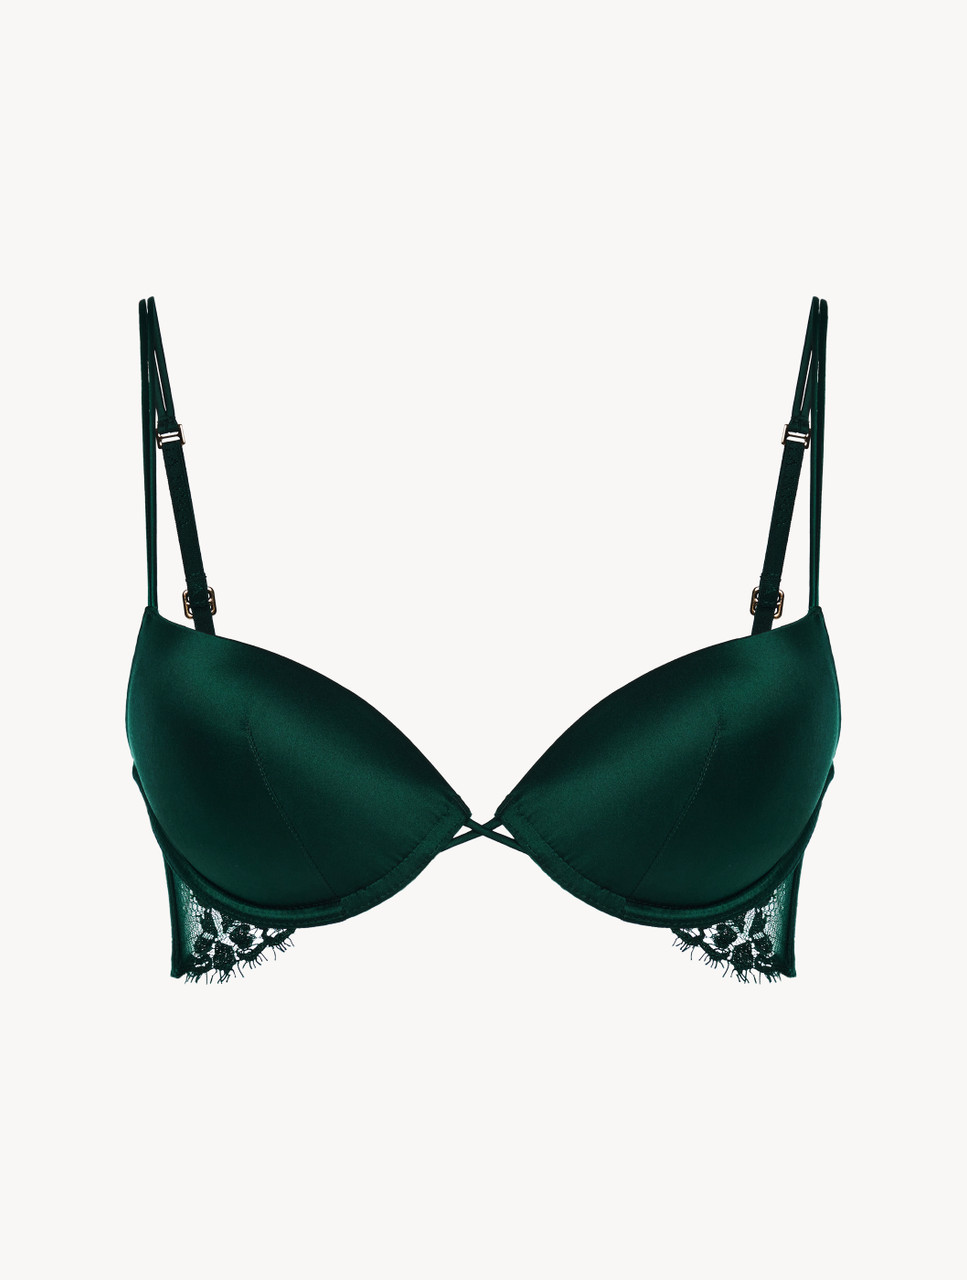 Green push-up bra with Leavers lace trim